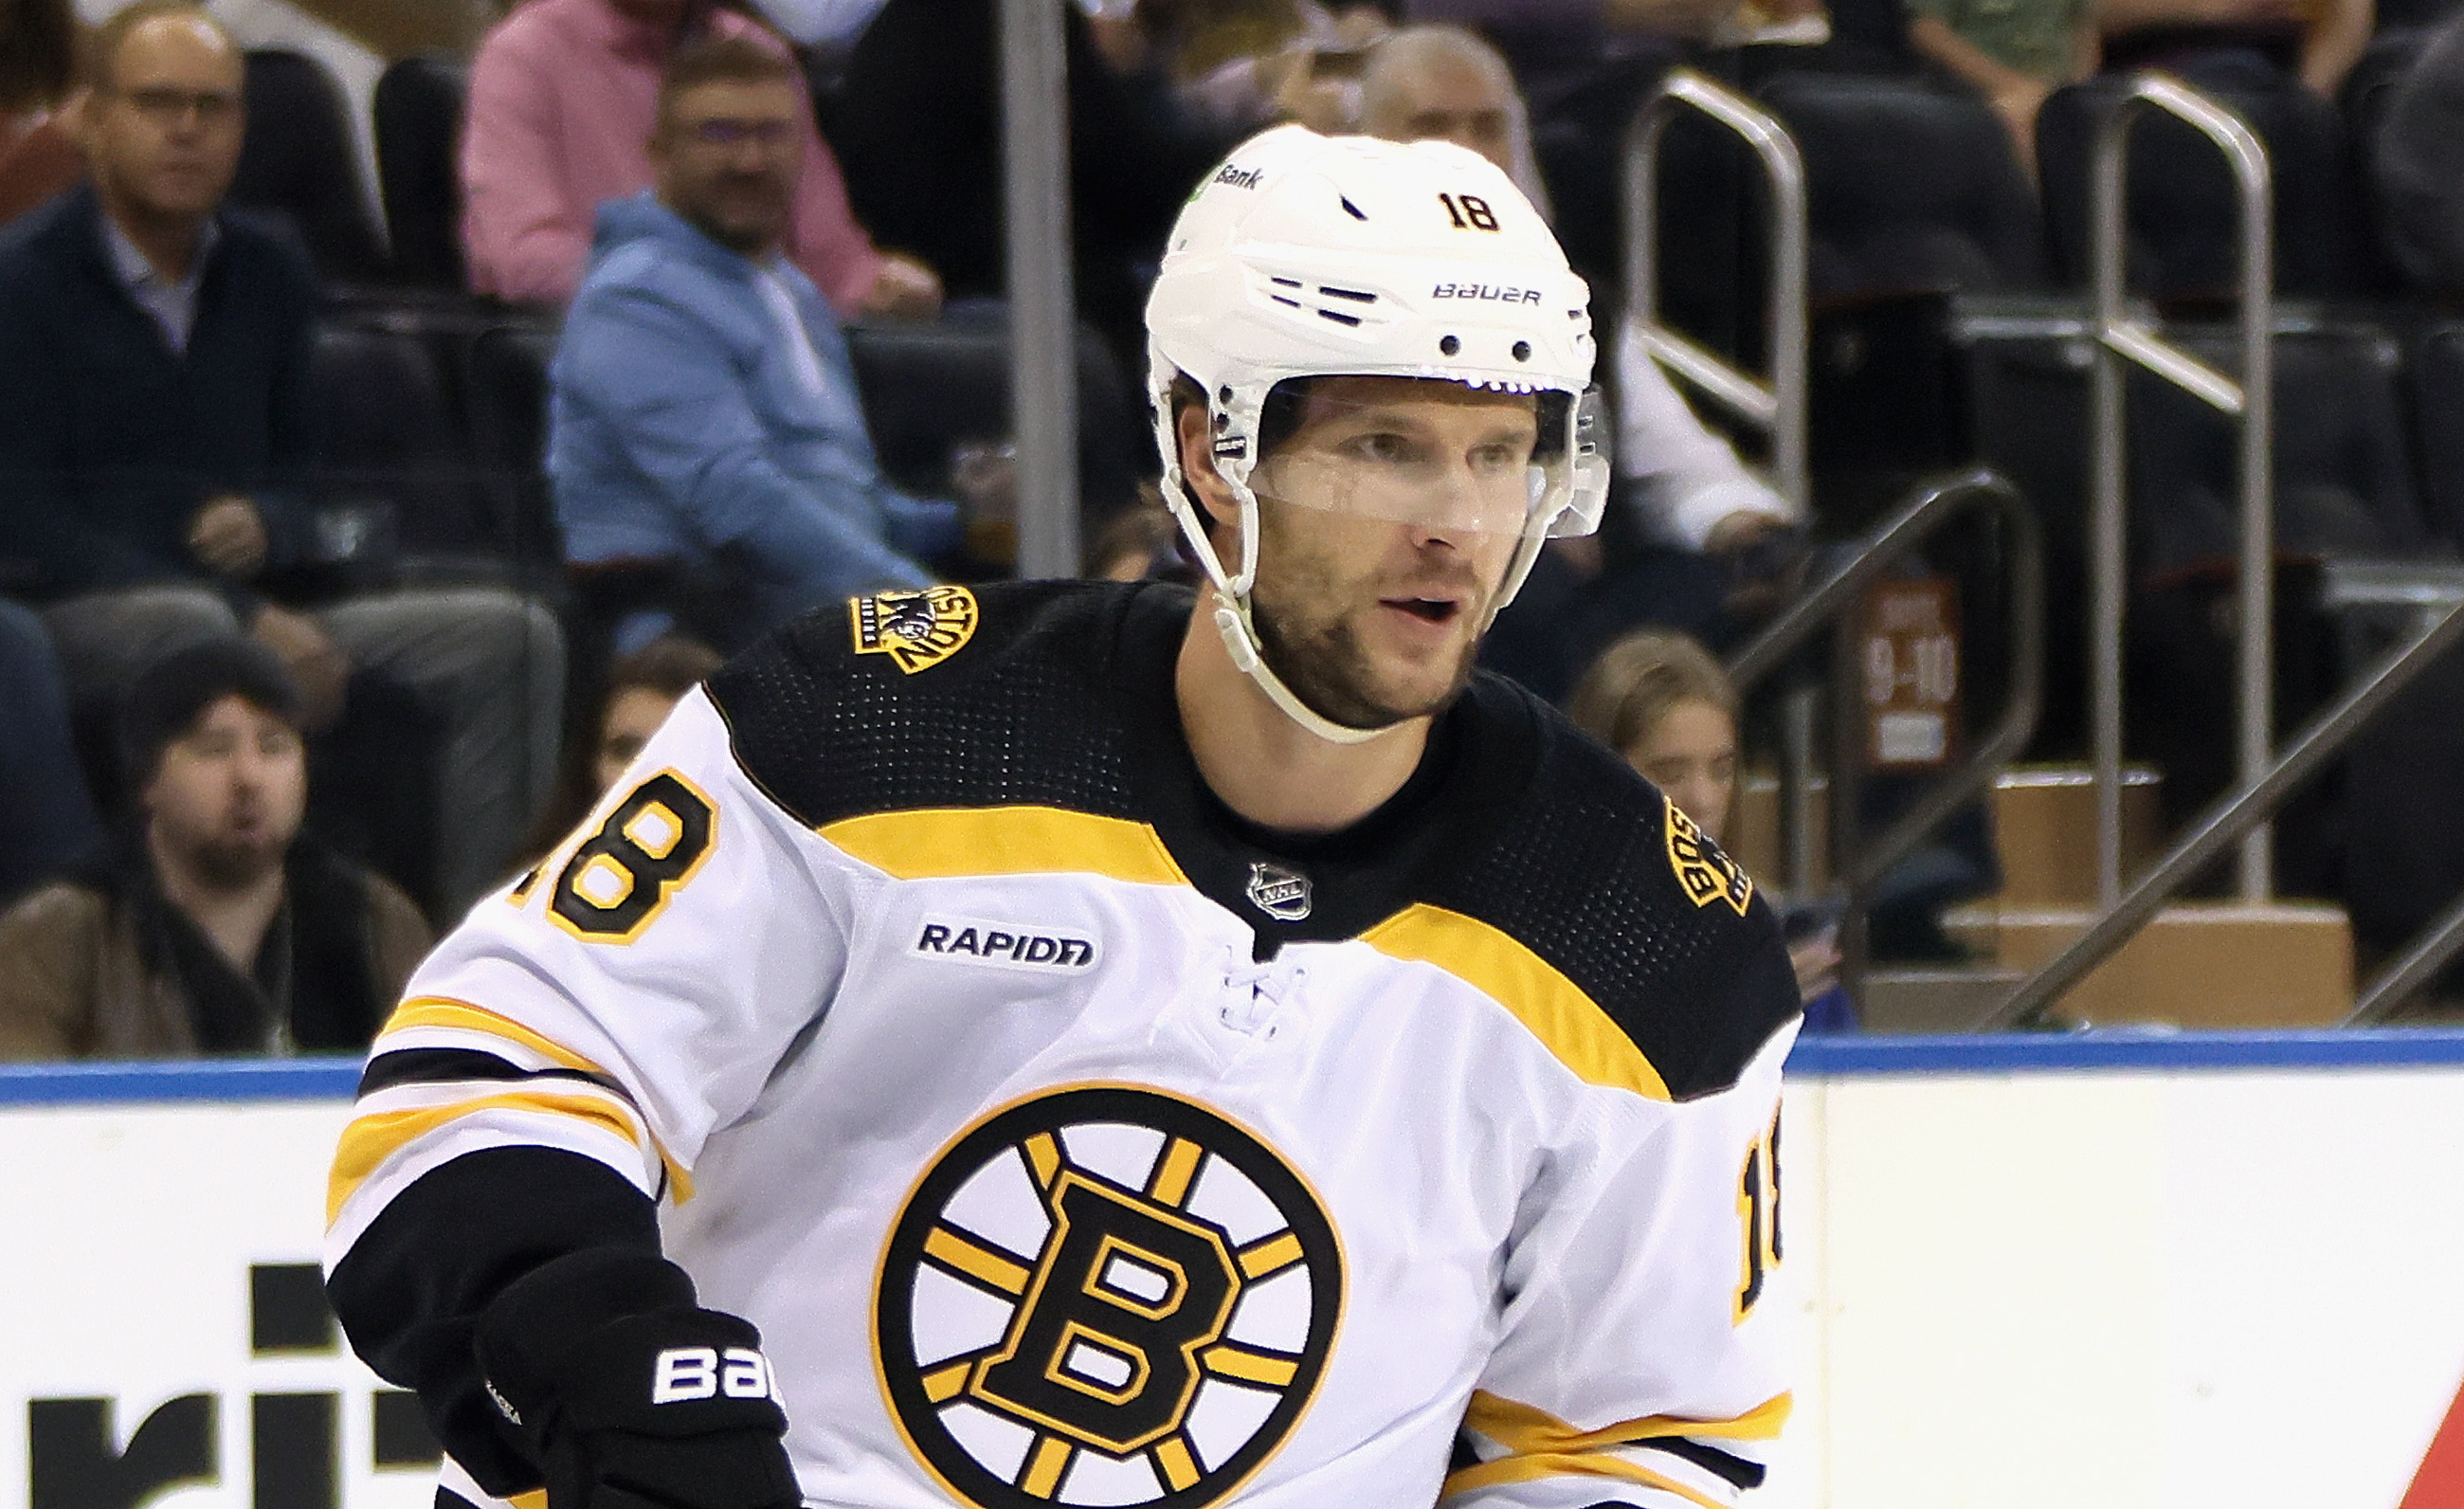 HE IS BACK FROM A LONG INJURY BREAK TO PLAY FOR BRUINS